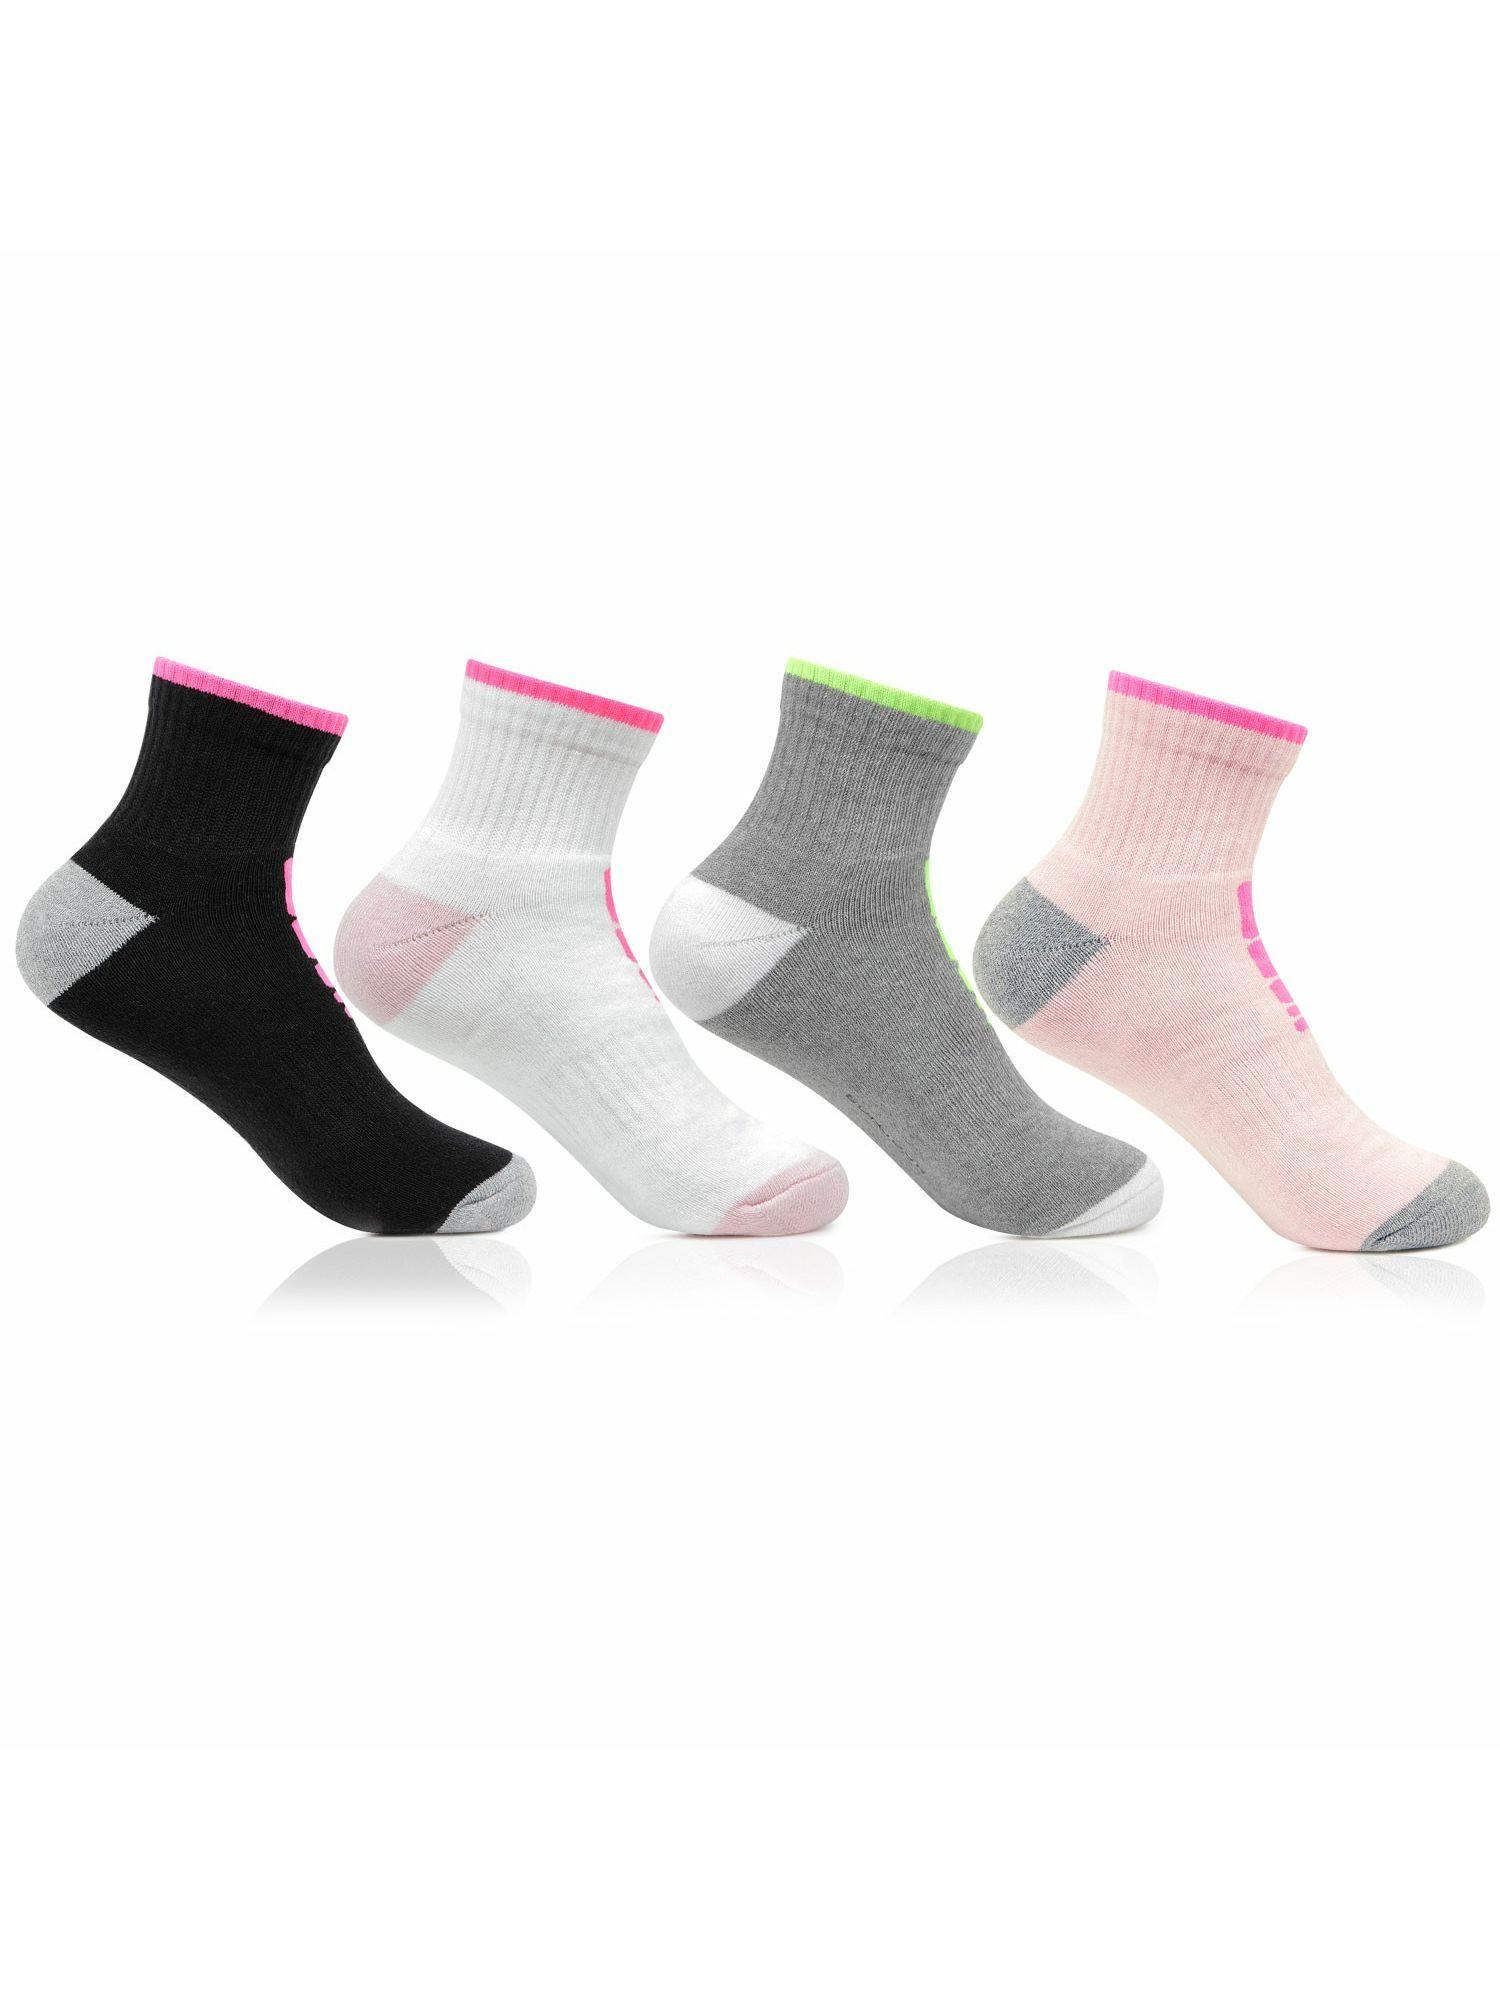 women multicolored cushioned gym and sports socks- pack of 4